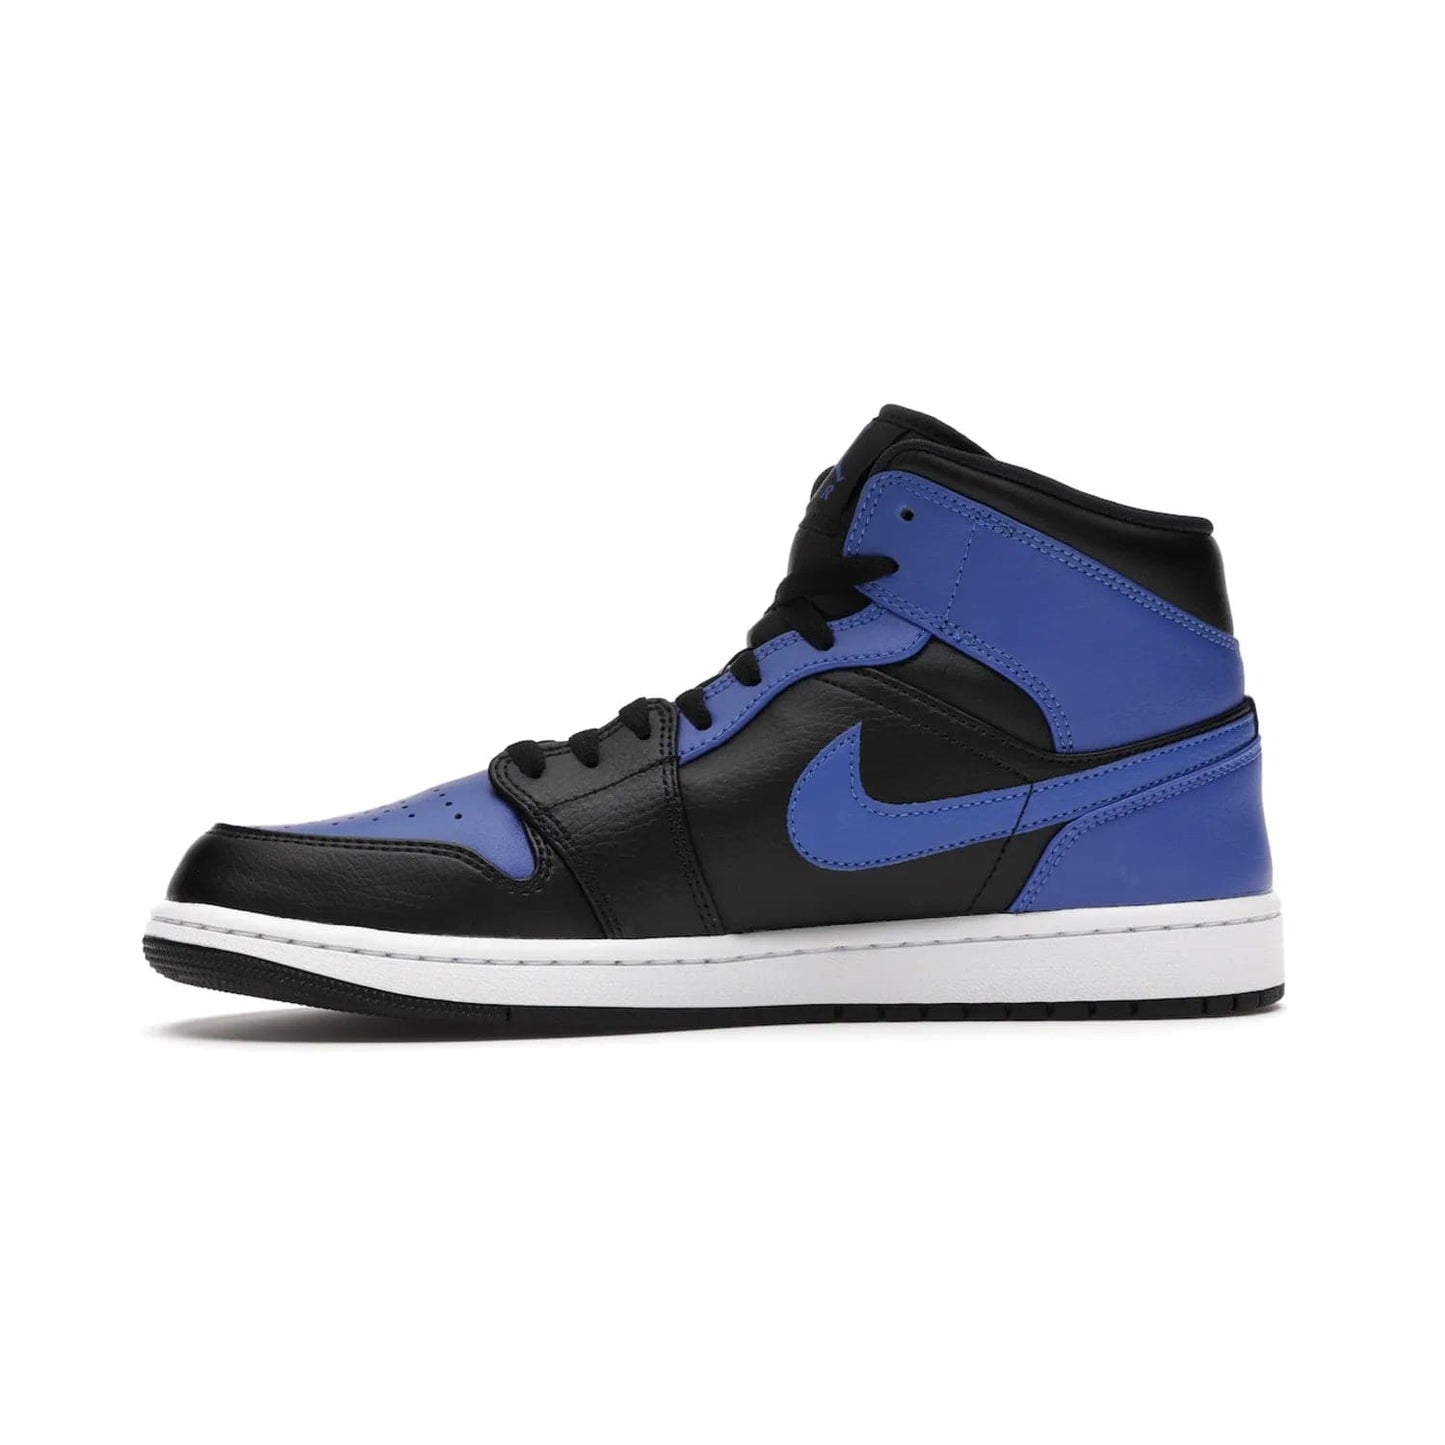 Jordan 1 Mid Hyper Royal Tumbled Leather - Image 18 - Only at www.BallersClubKickz.com - Iconic colorway of the Air Jordan 1 Mid Black Royal Tumbled Leather. Features a black tumbled leather upper, royal blue leather overlays, white midsole & black rubber outsole. Released December 2020. Adds premium style to any collection.